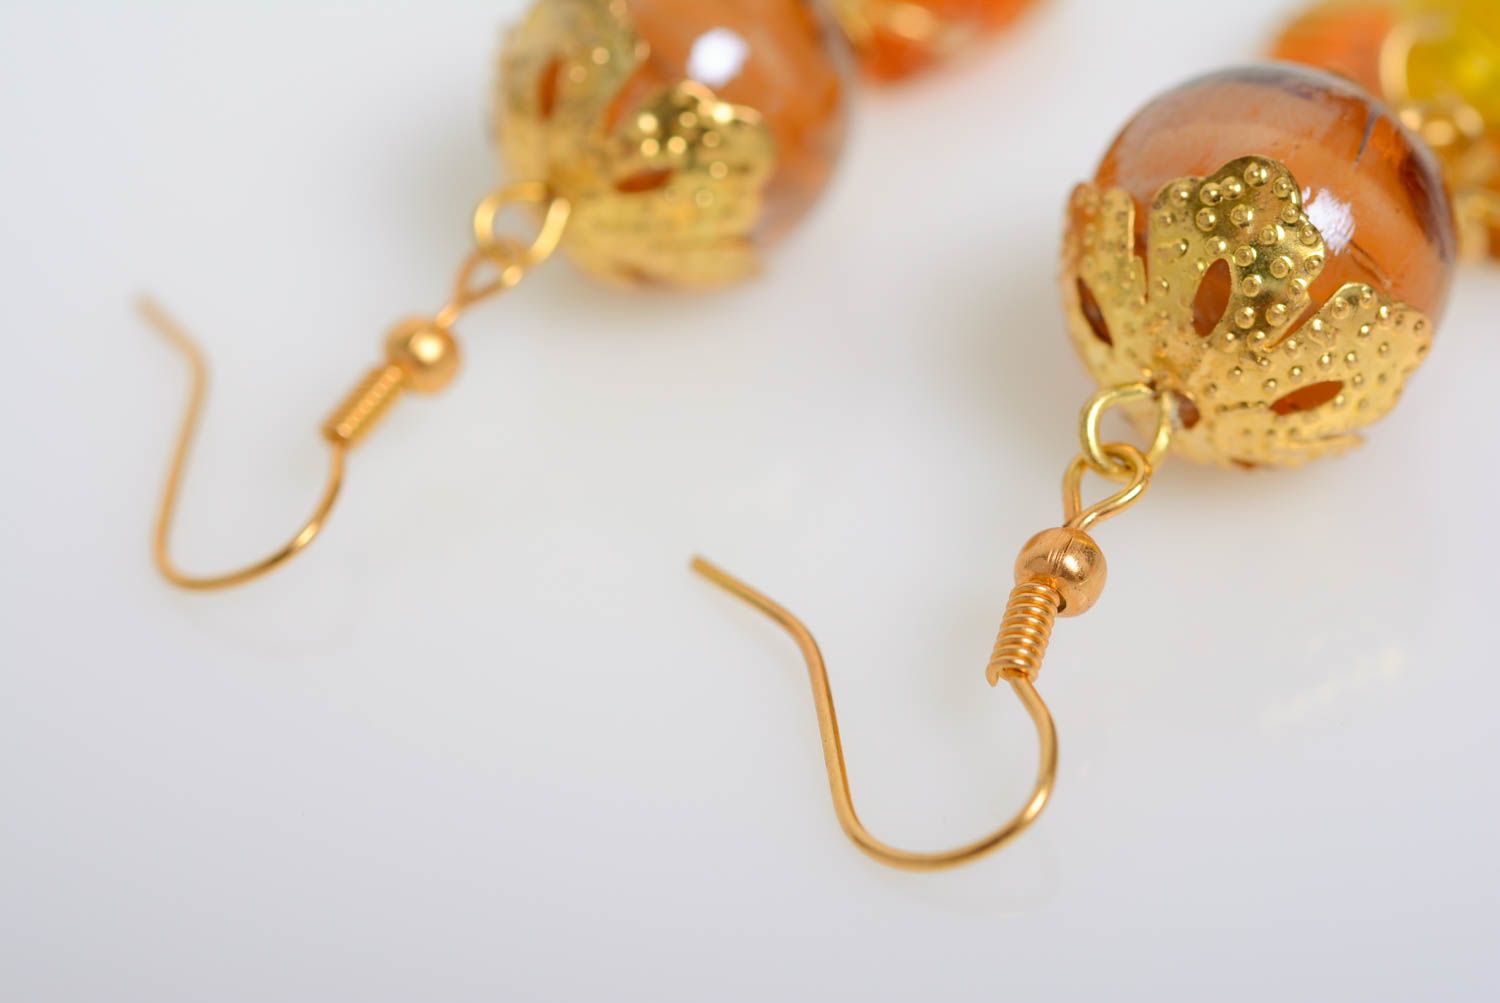 Handmade long designer dangling earrings with glass beads and metal elements photo 5